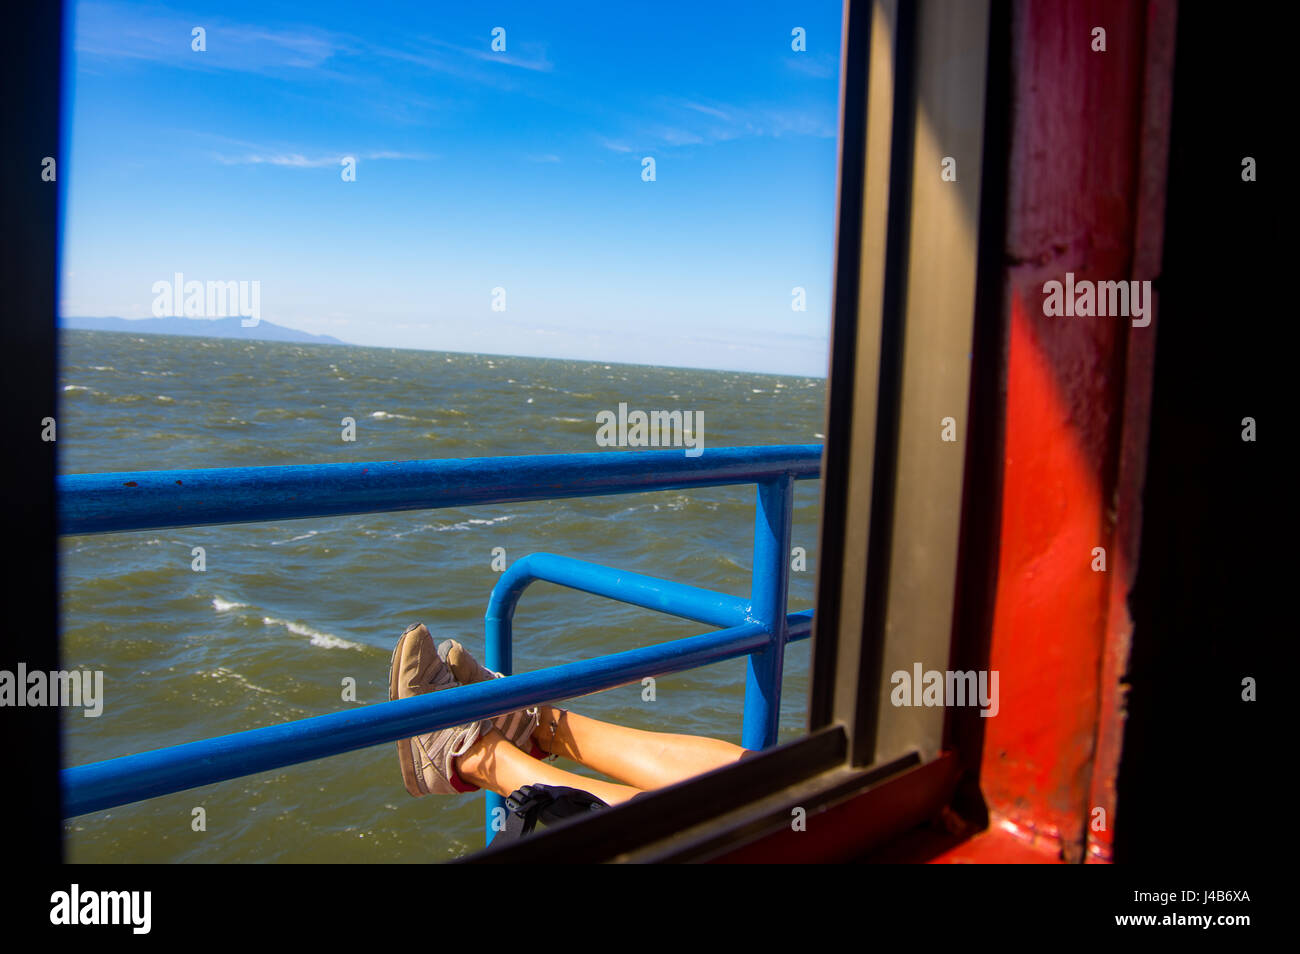 On the ferry to Ometepe island in Nicaragua Stock Photo